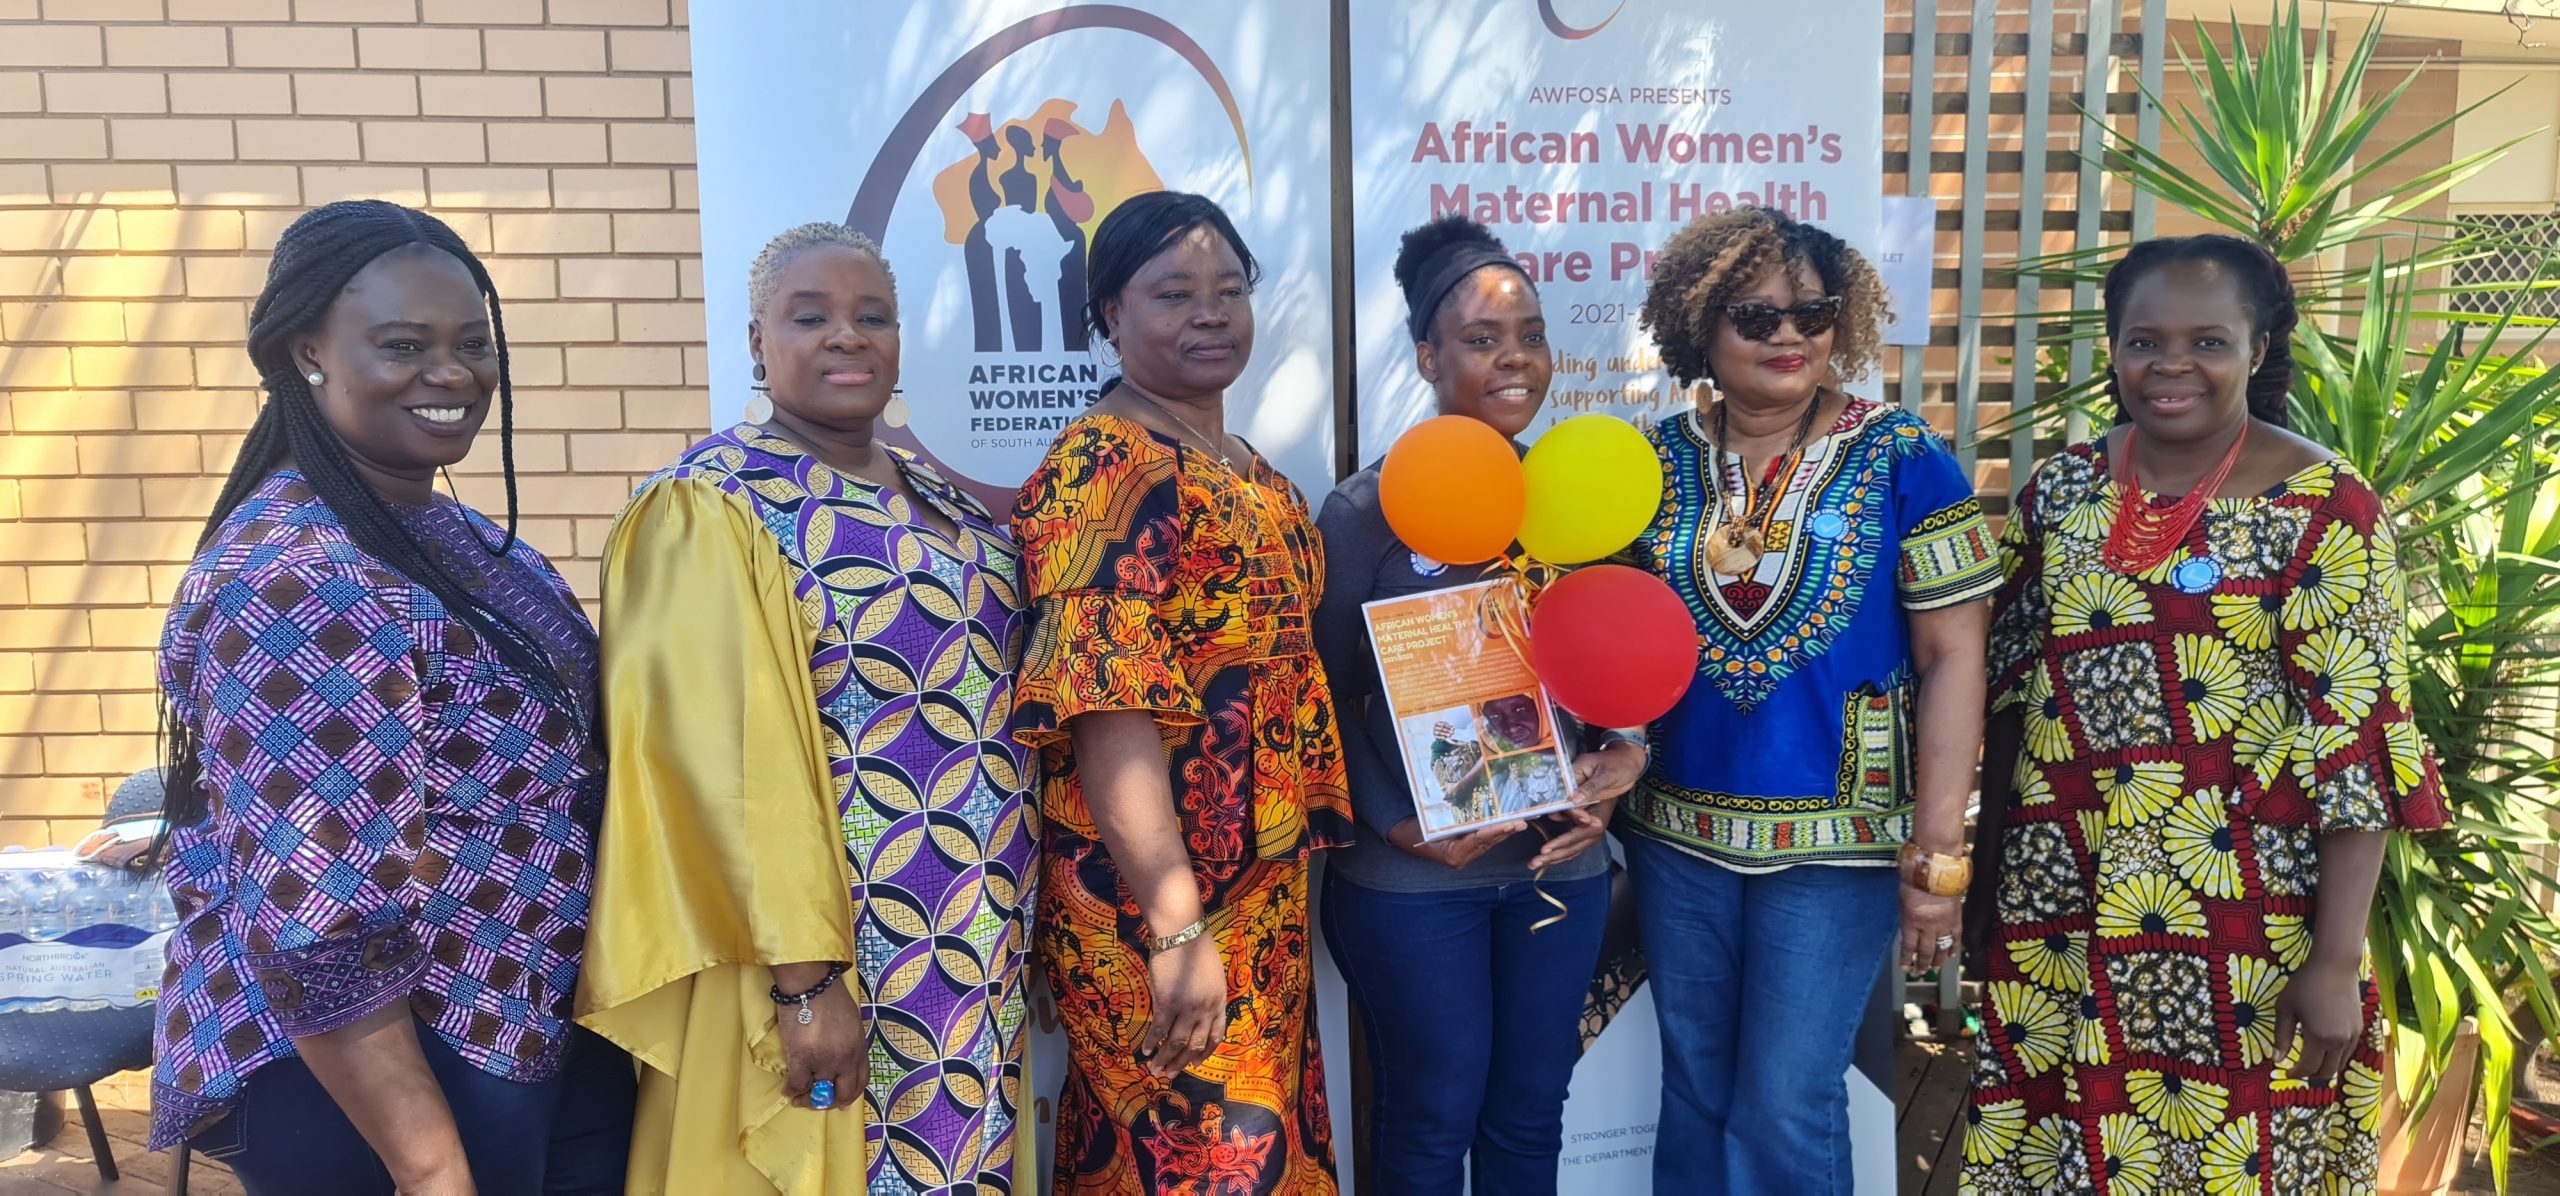 Promoting Refugee Women’s Safety African Women’s Federation of South Australia (AWFOSA) 2021/2022